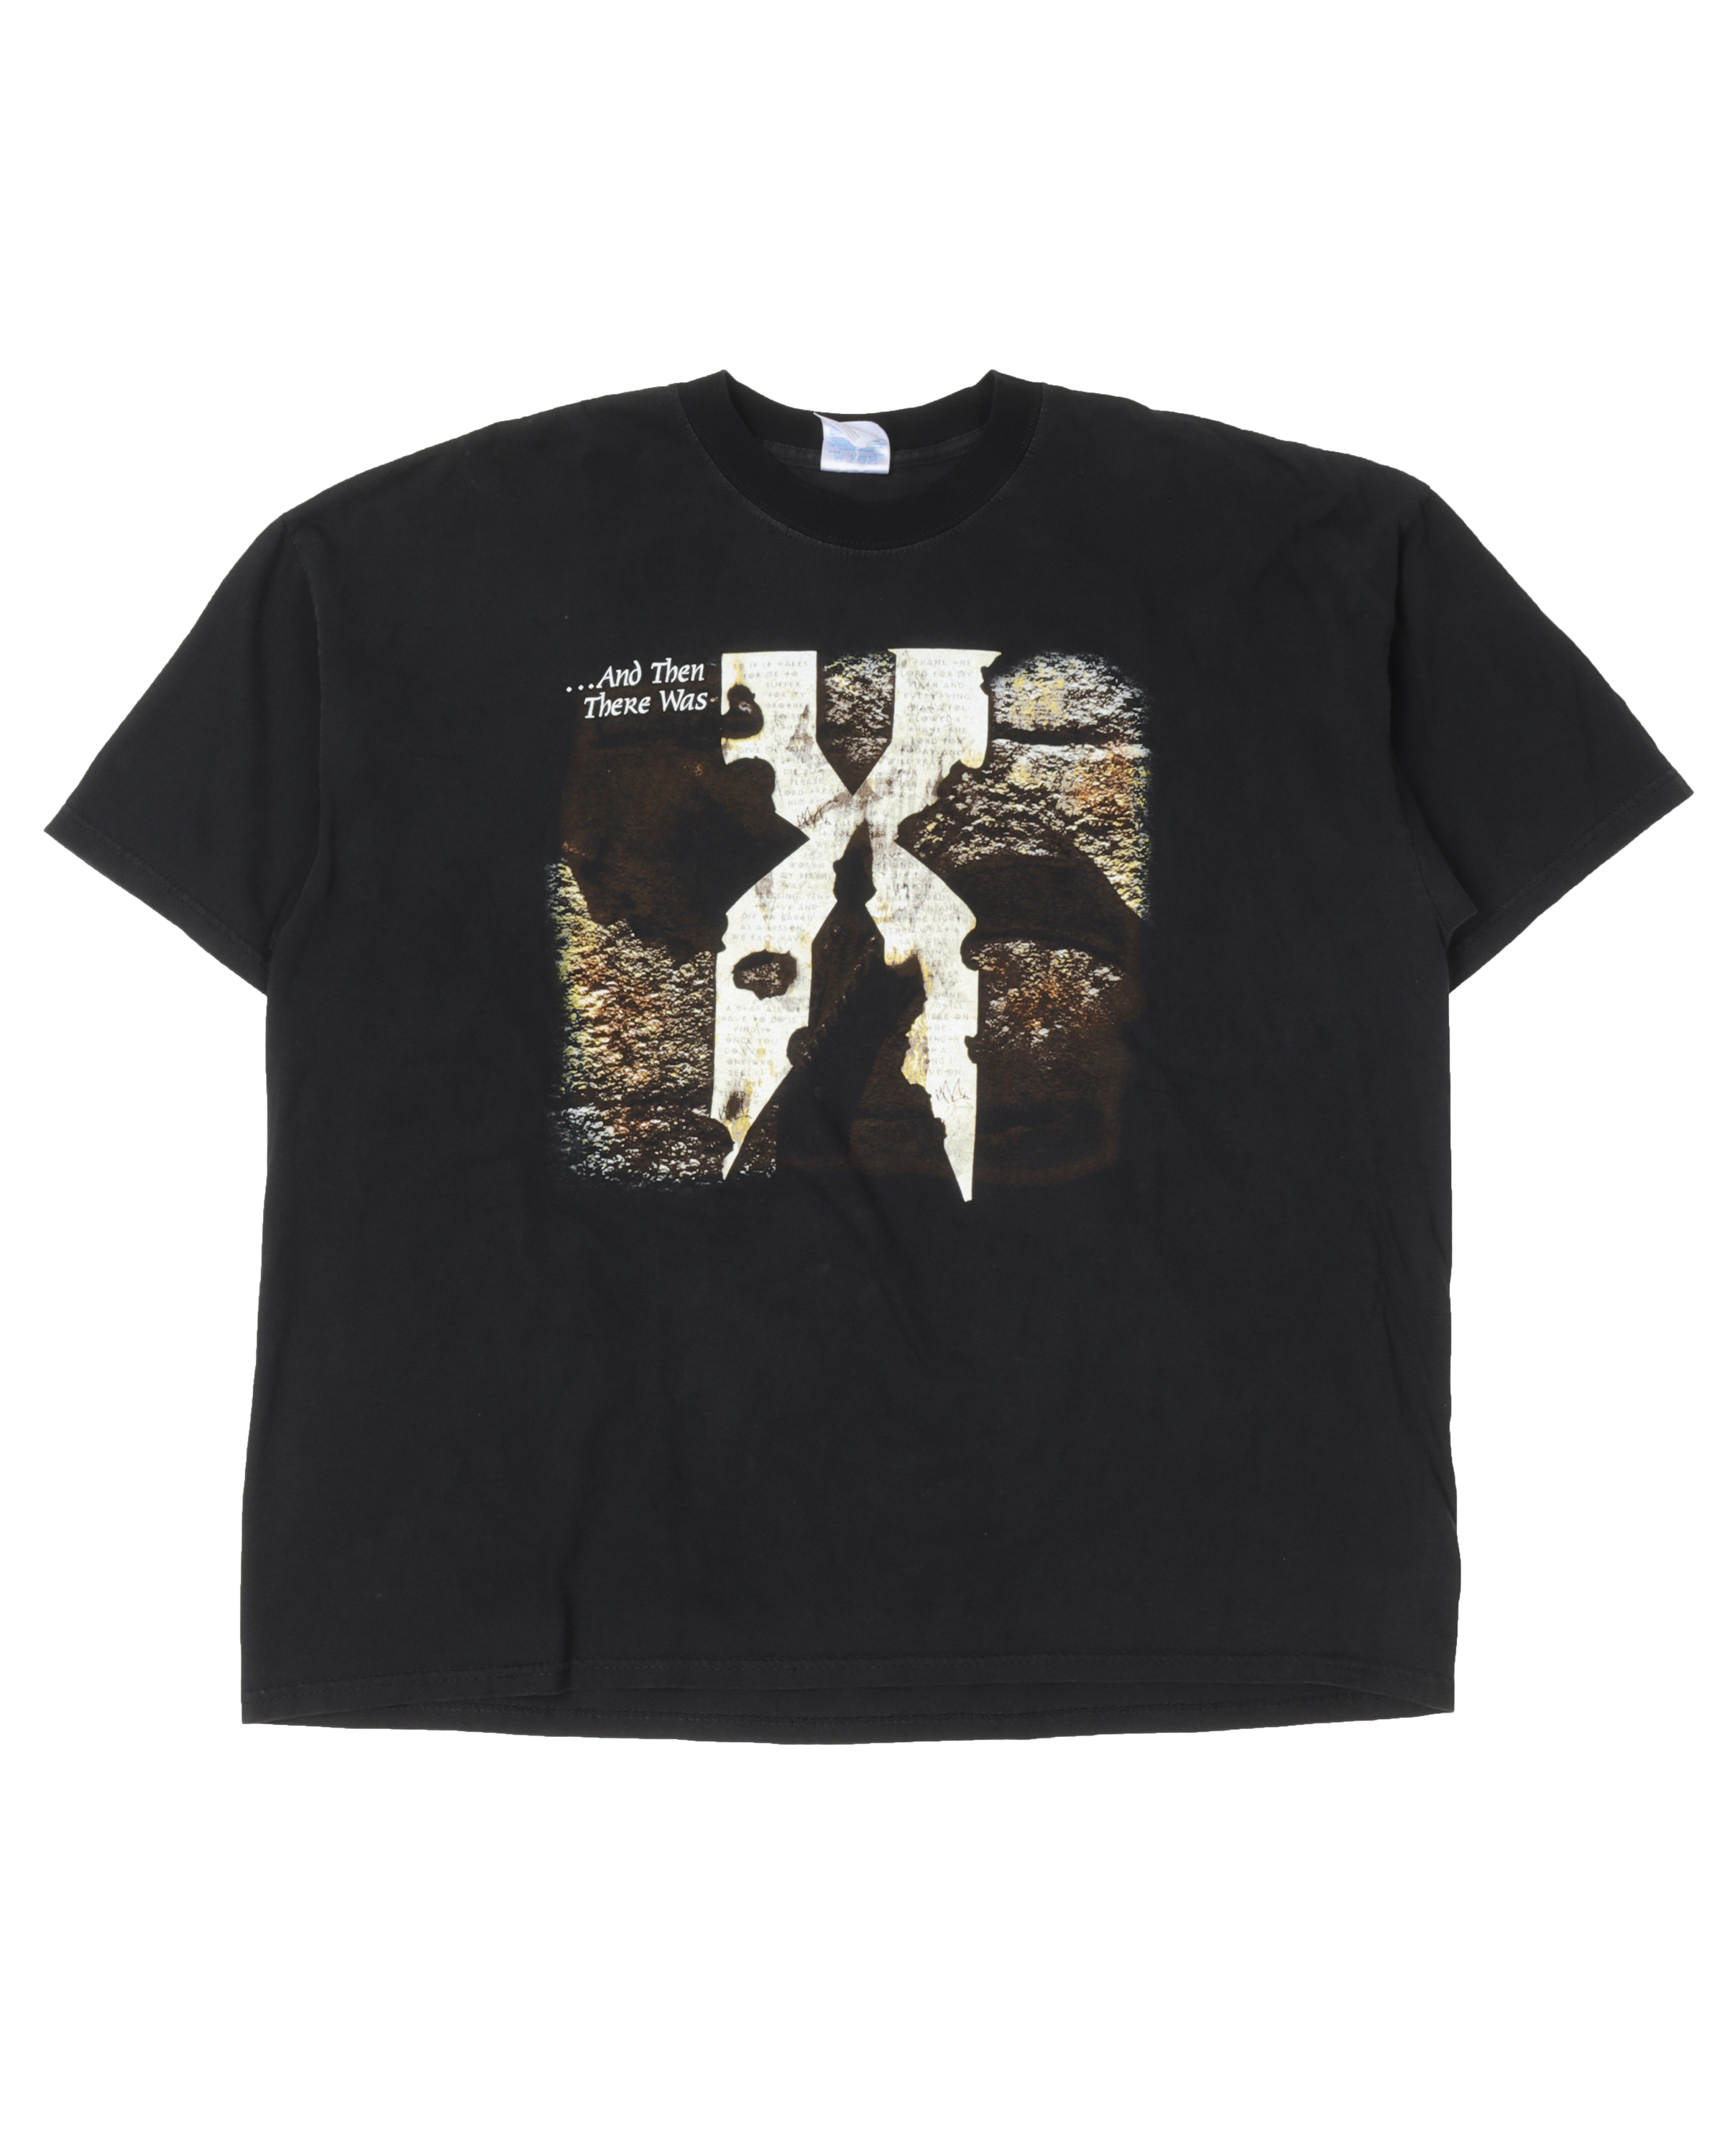 DMX "And Then There Was X" T-Shirt